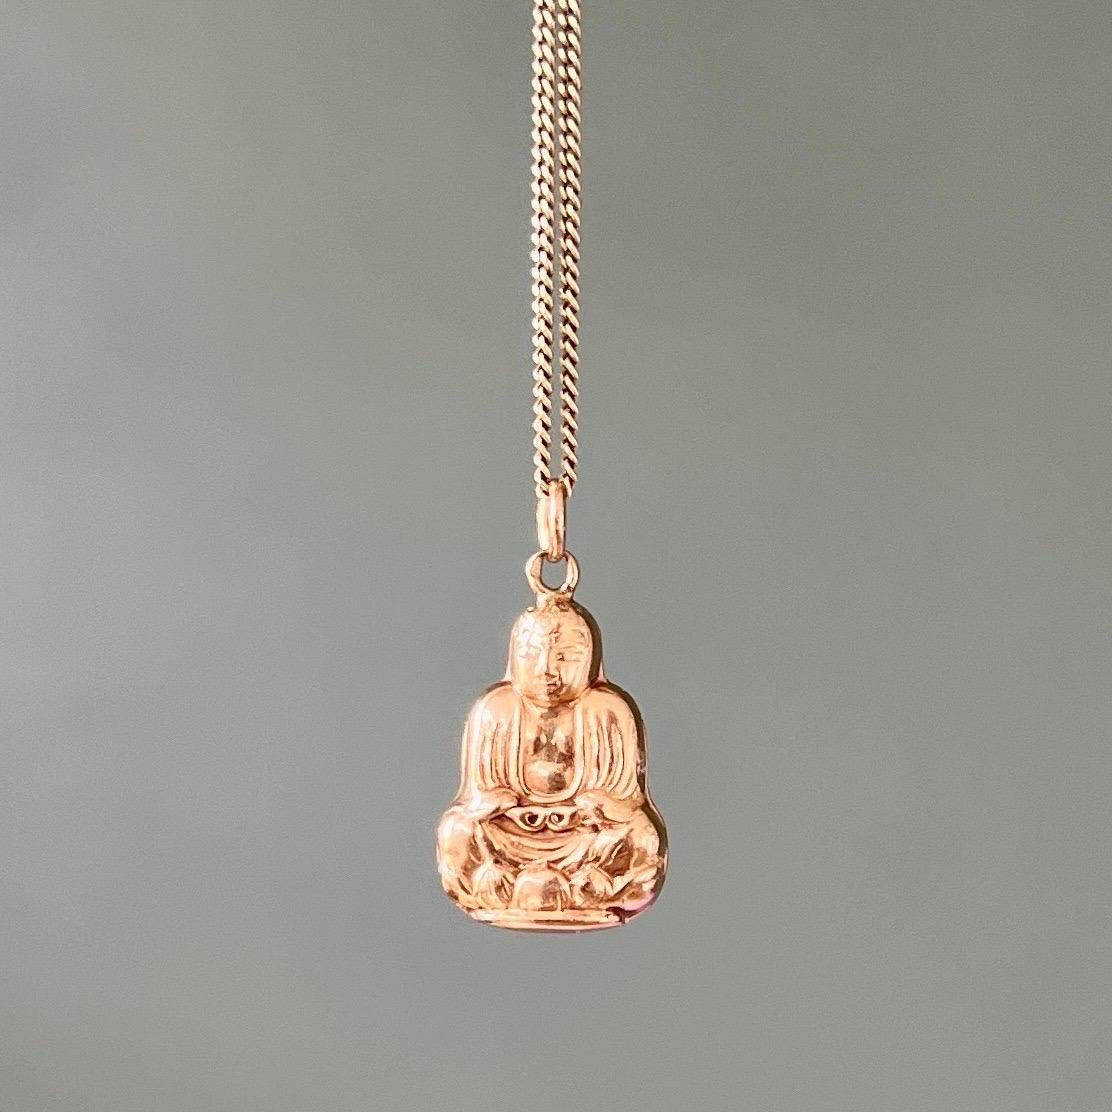 A vintage seated buddha charm pendant created in 14 karat gold. The gold buddha is beautifully detailed and is wearing a robe over his shoulders. The body of the buddha is detailed with raised work. The charms comes without the chain.

Collect your